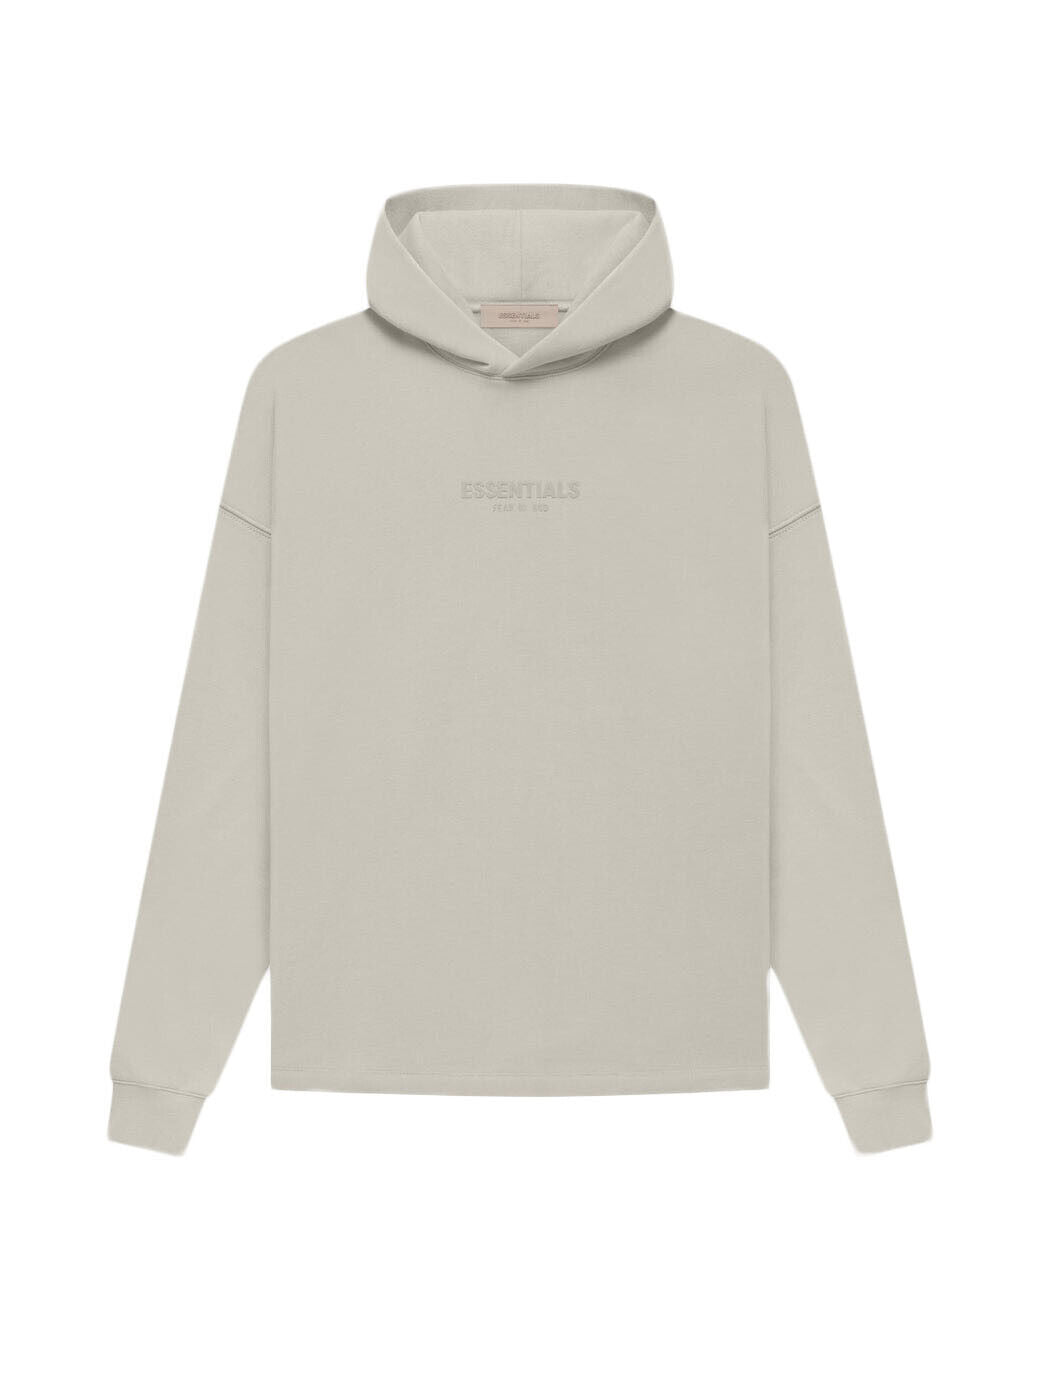 Fear of God Essentials Relaxed Hoodie Smoke Size Medium